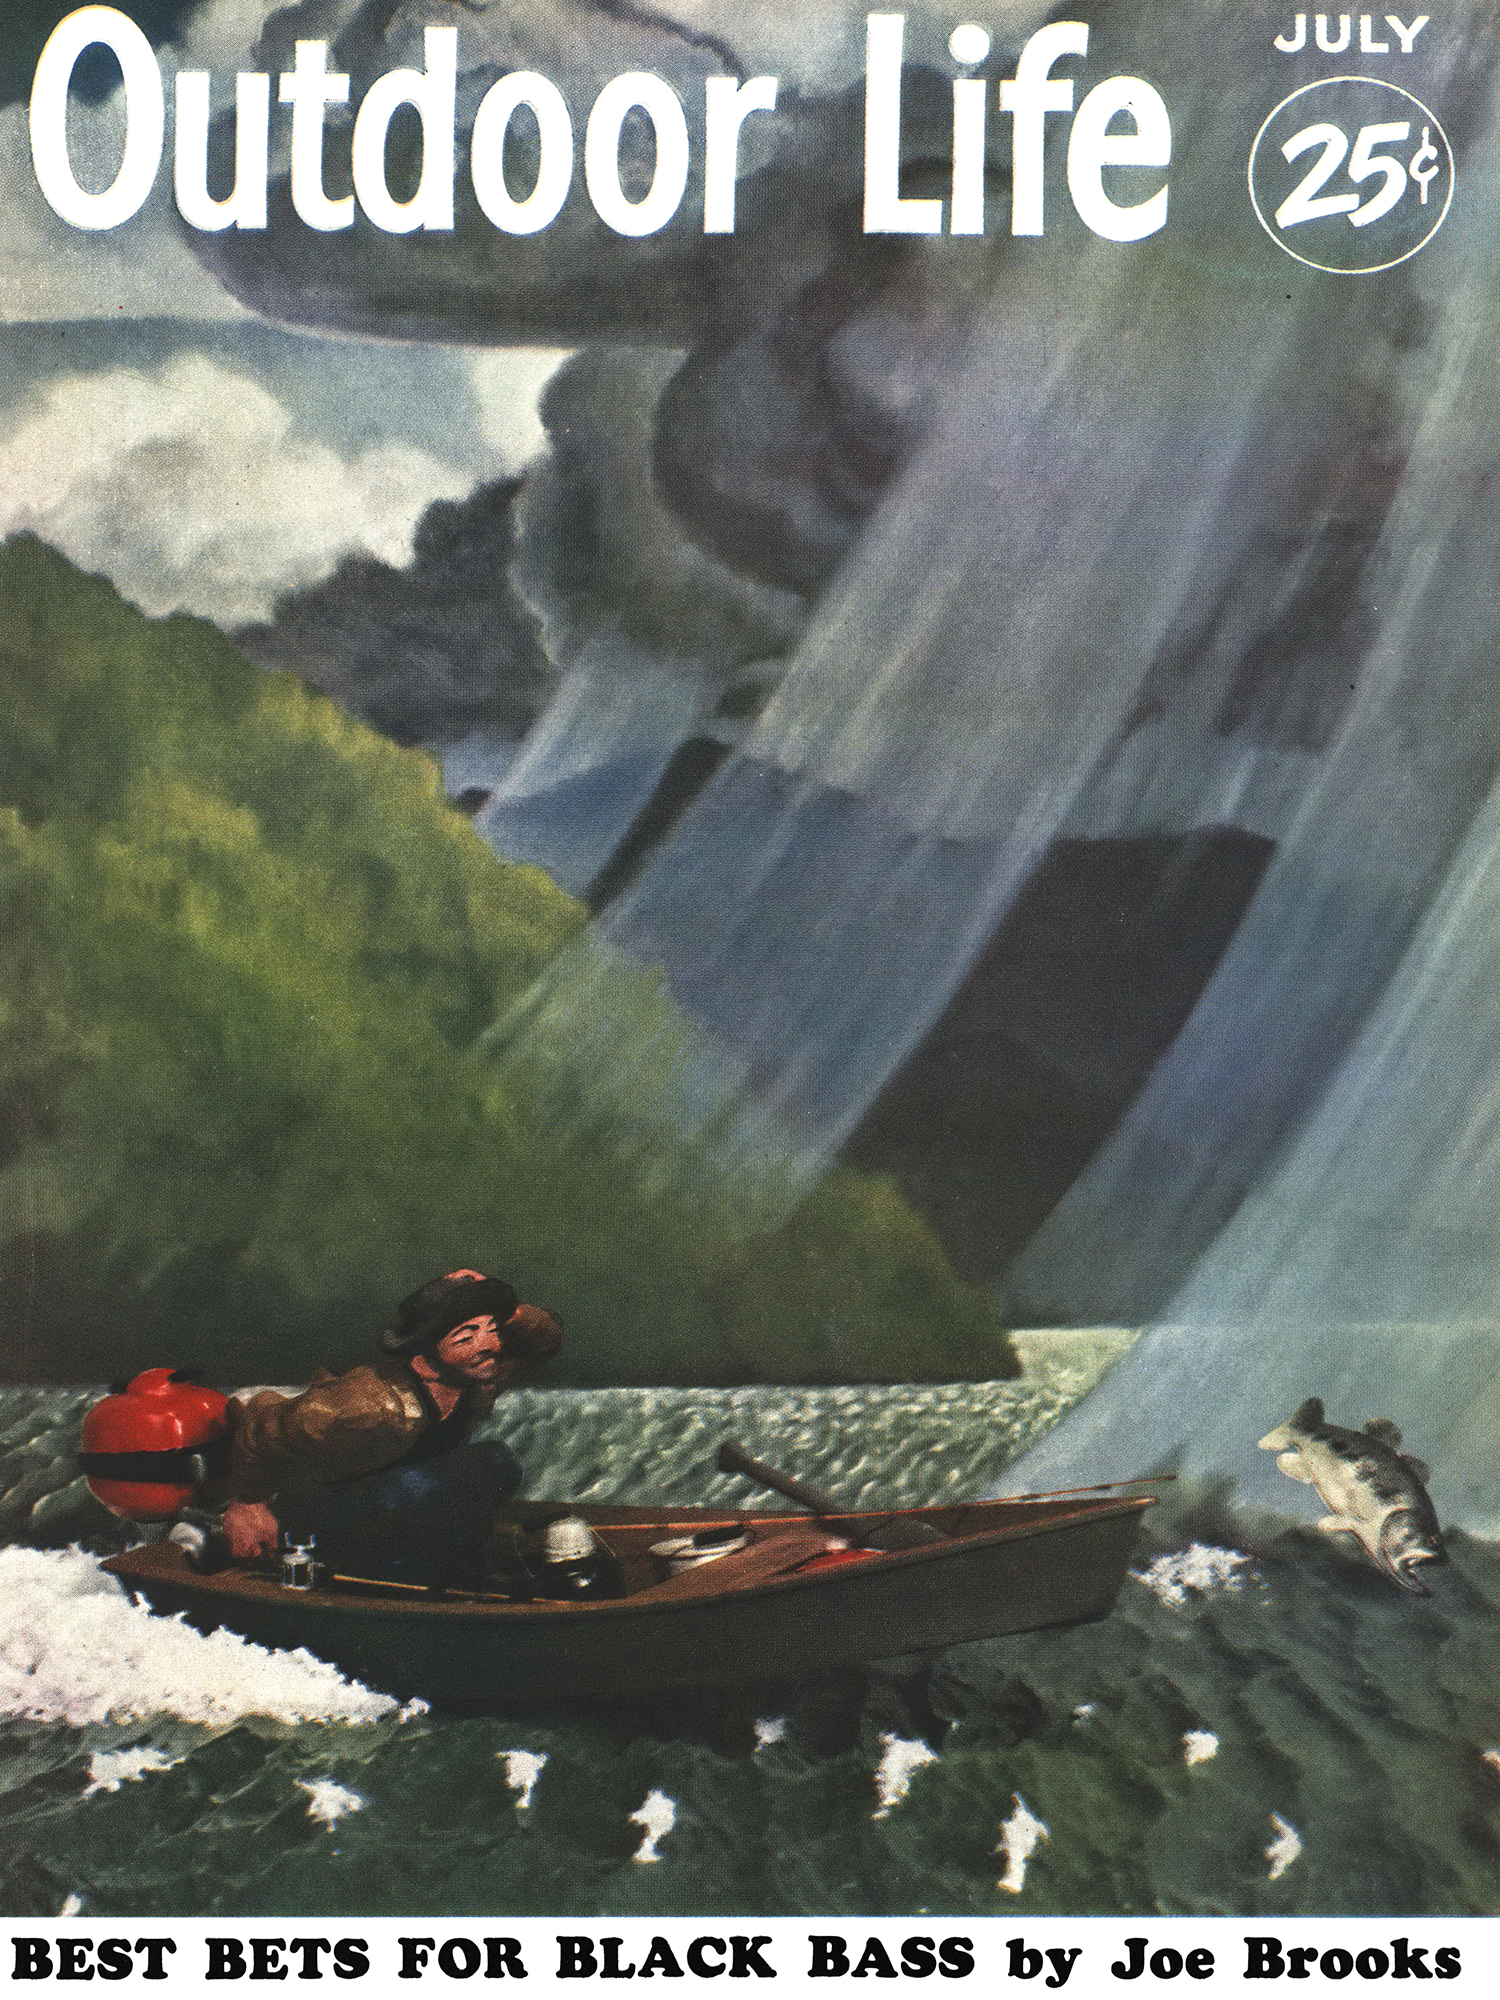 July 1952 cover of Outdoor Life magazine